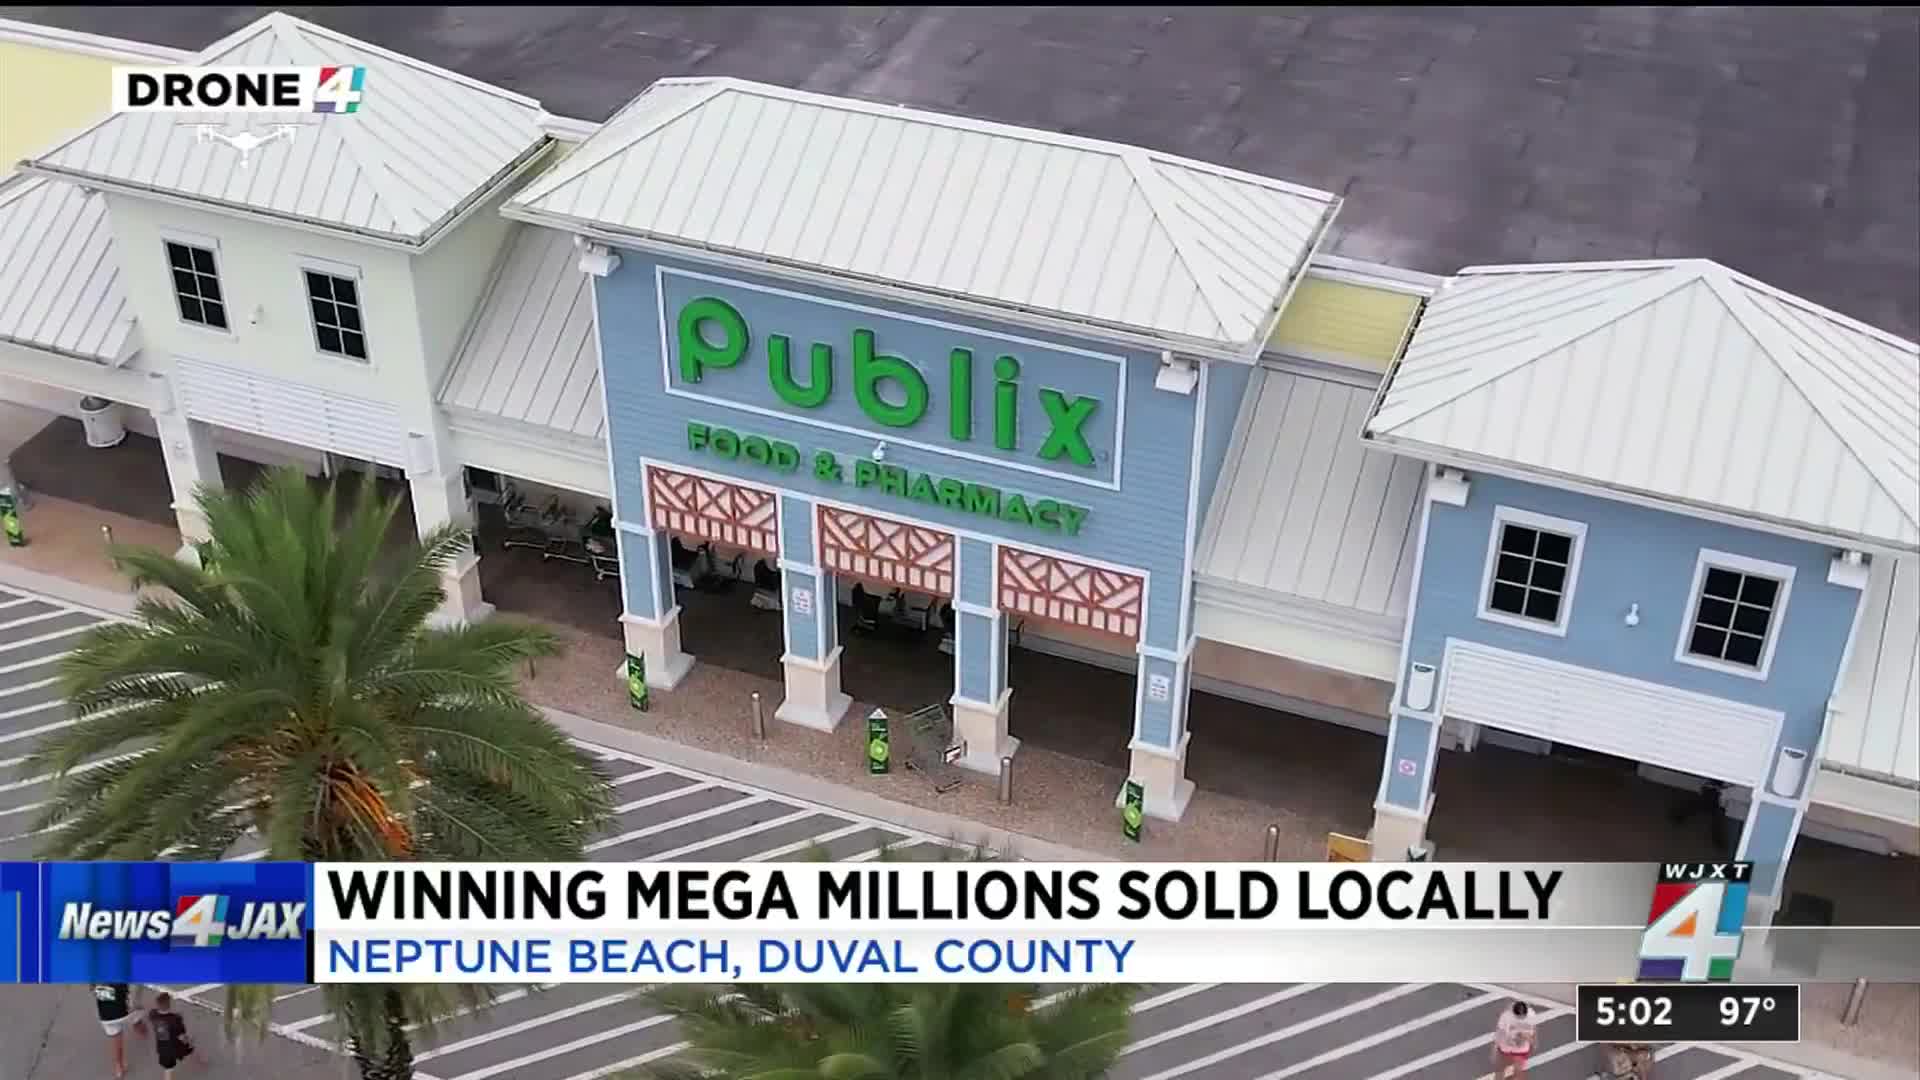 $1 million Powerball ticket sold at Florida Publix